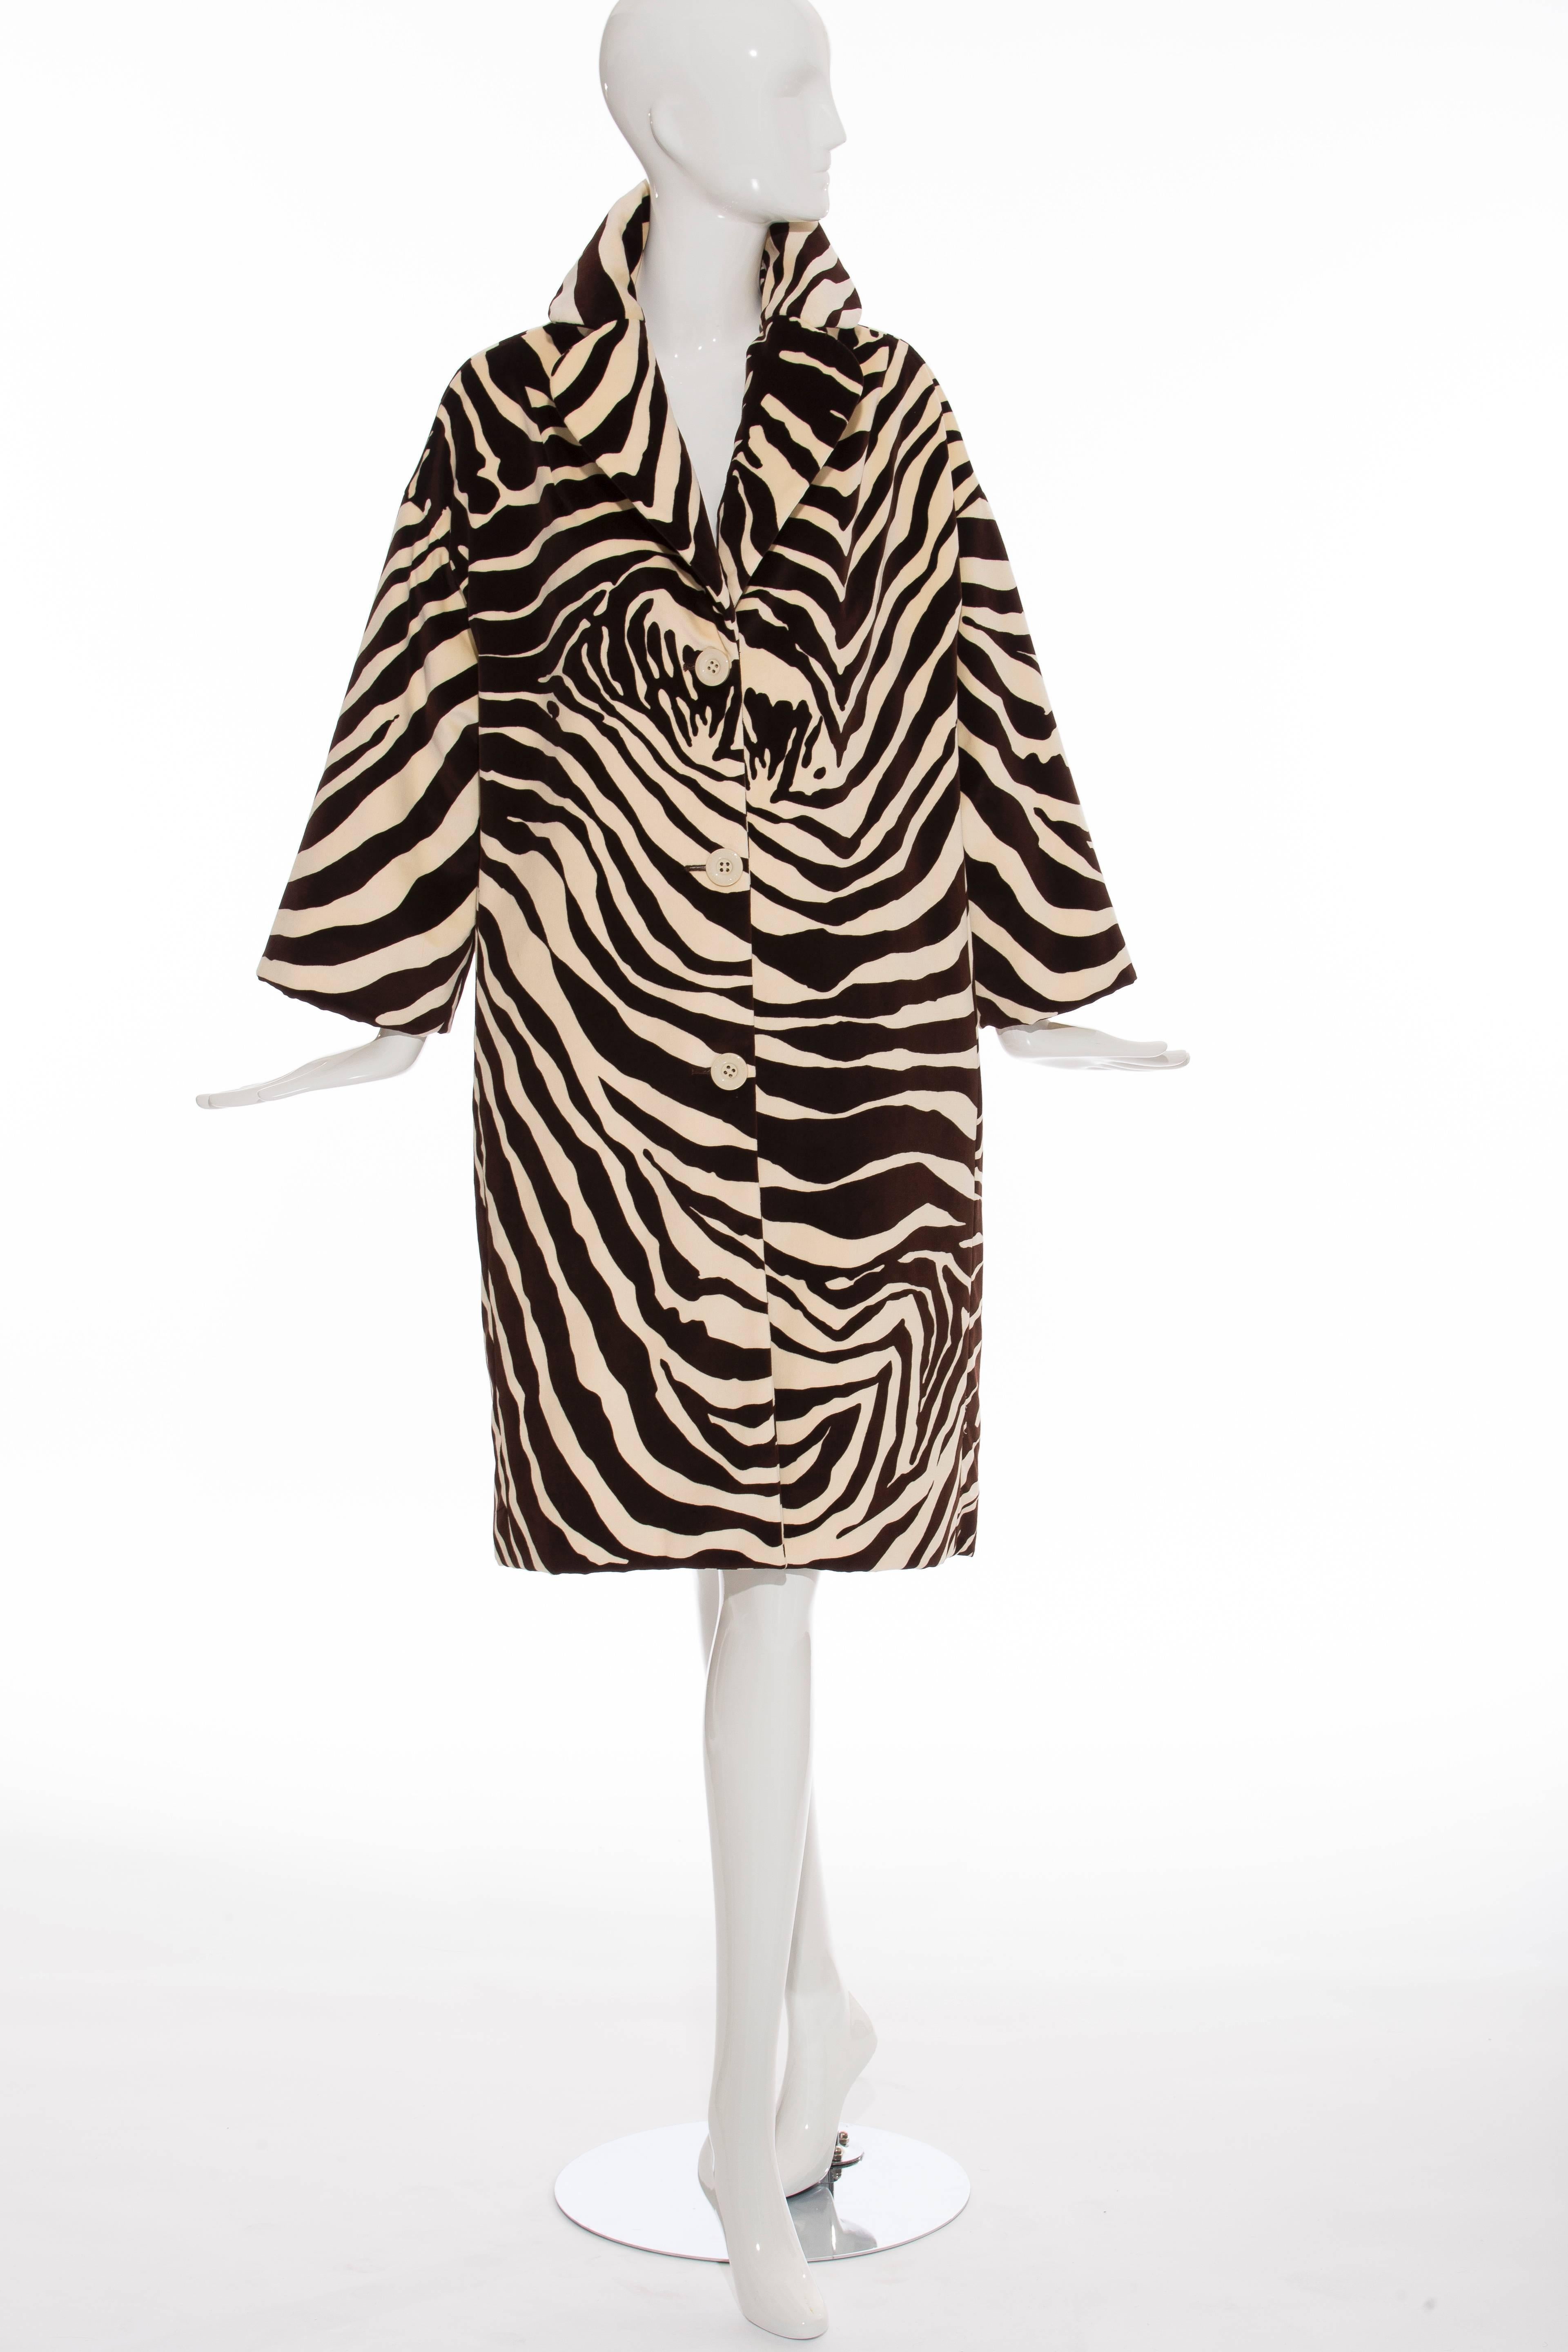 Dolce & Gabbana, Autumn-Winter 1996 cream and chocolate brown cotton velvet coat with zebra print throughout, rounded lapel, three-quarter sleeves, dual seam pockets at front and exposed button closures at center.

IT. 40
US. 4

Bust 48”, Waist